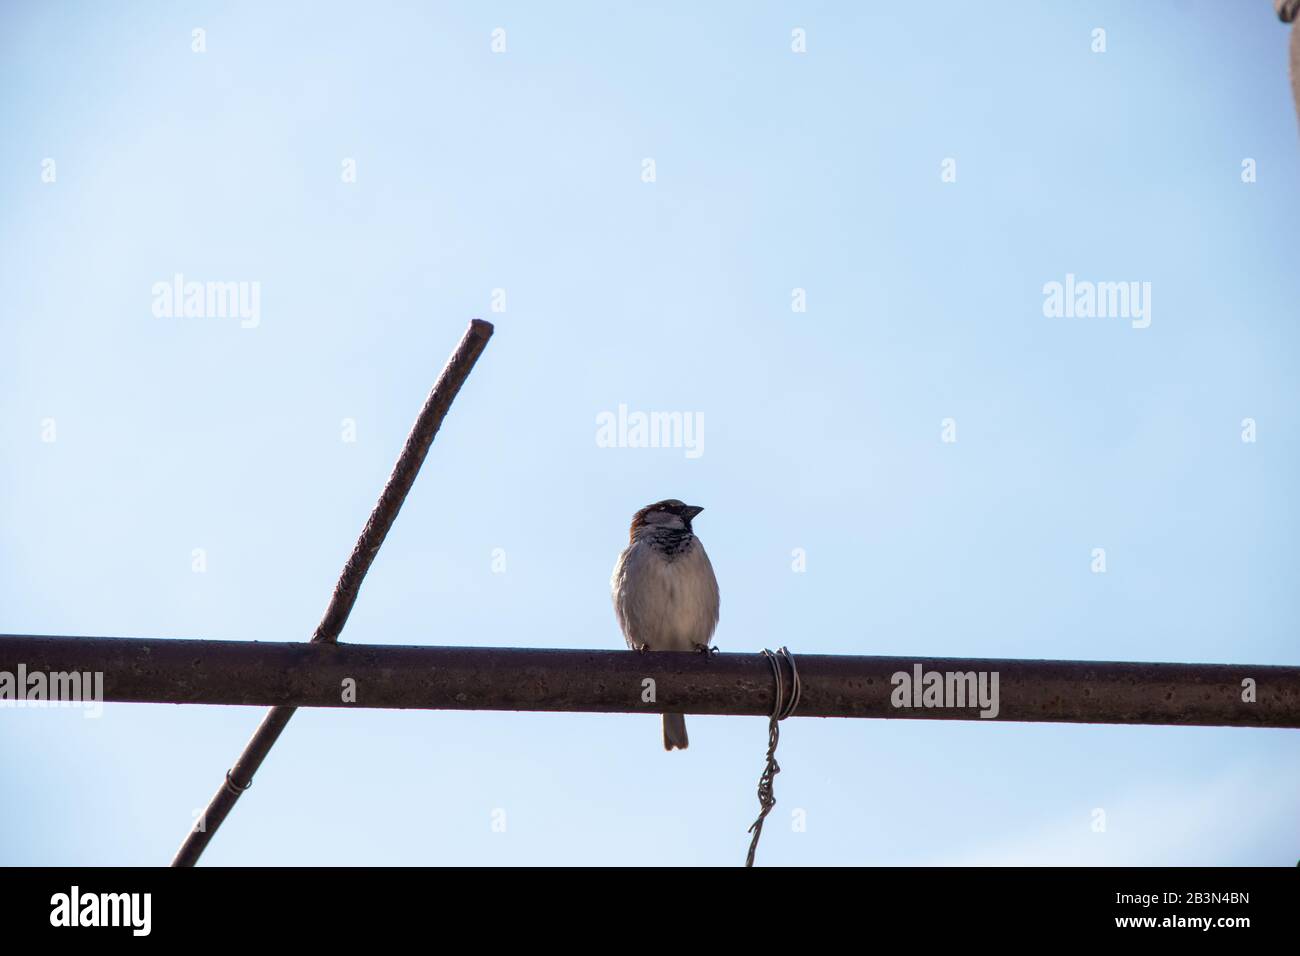 One sparrow sits on a pipe on the background of a blue spring sky with copyspace Stock Photo